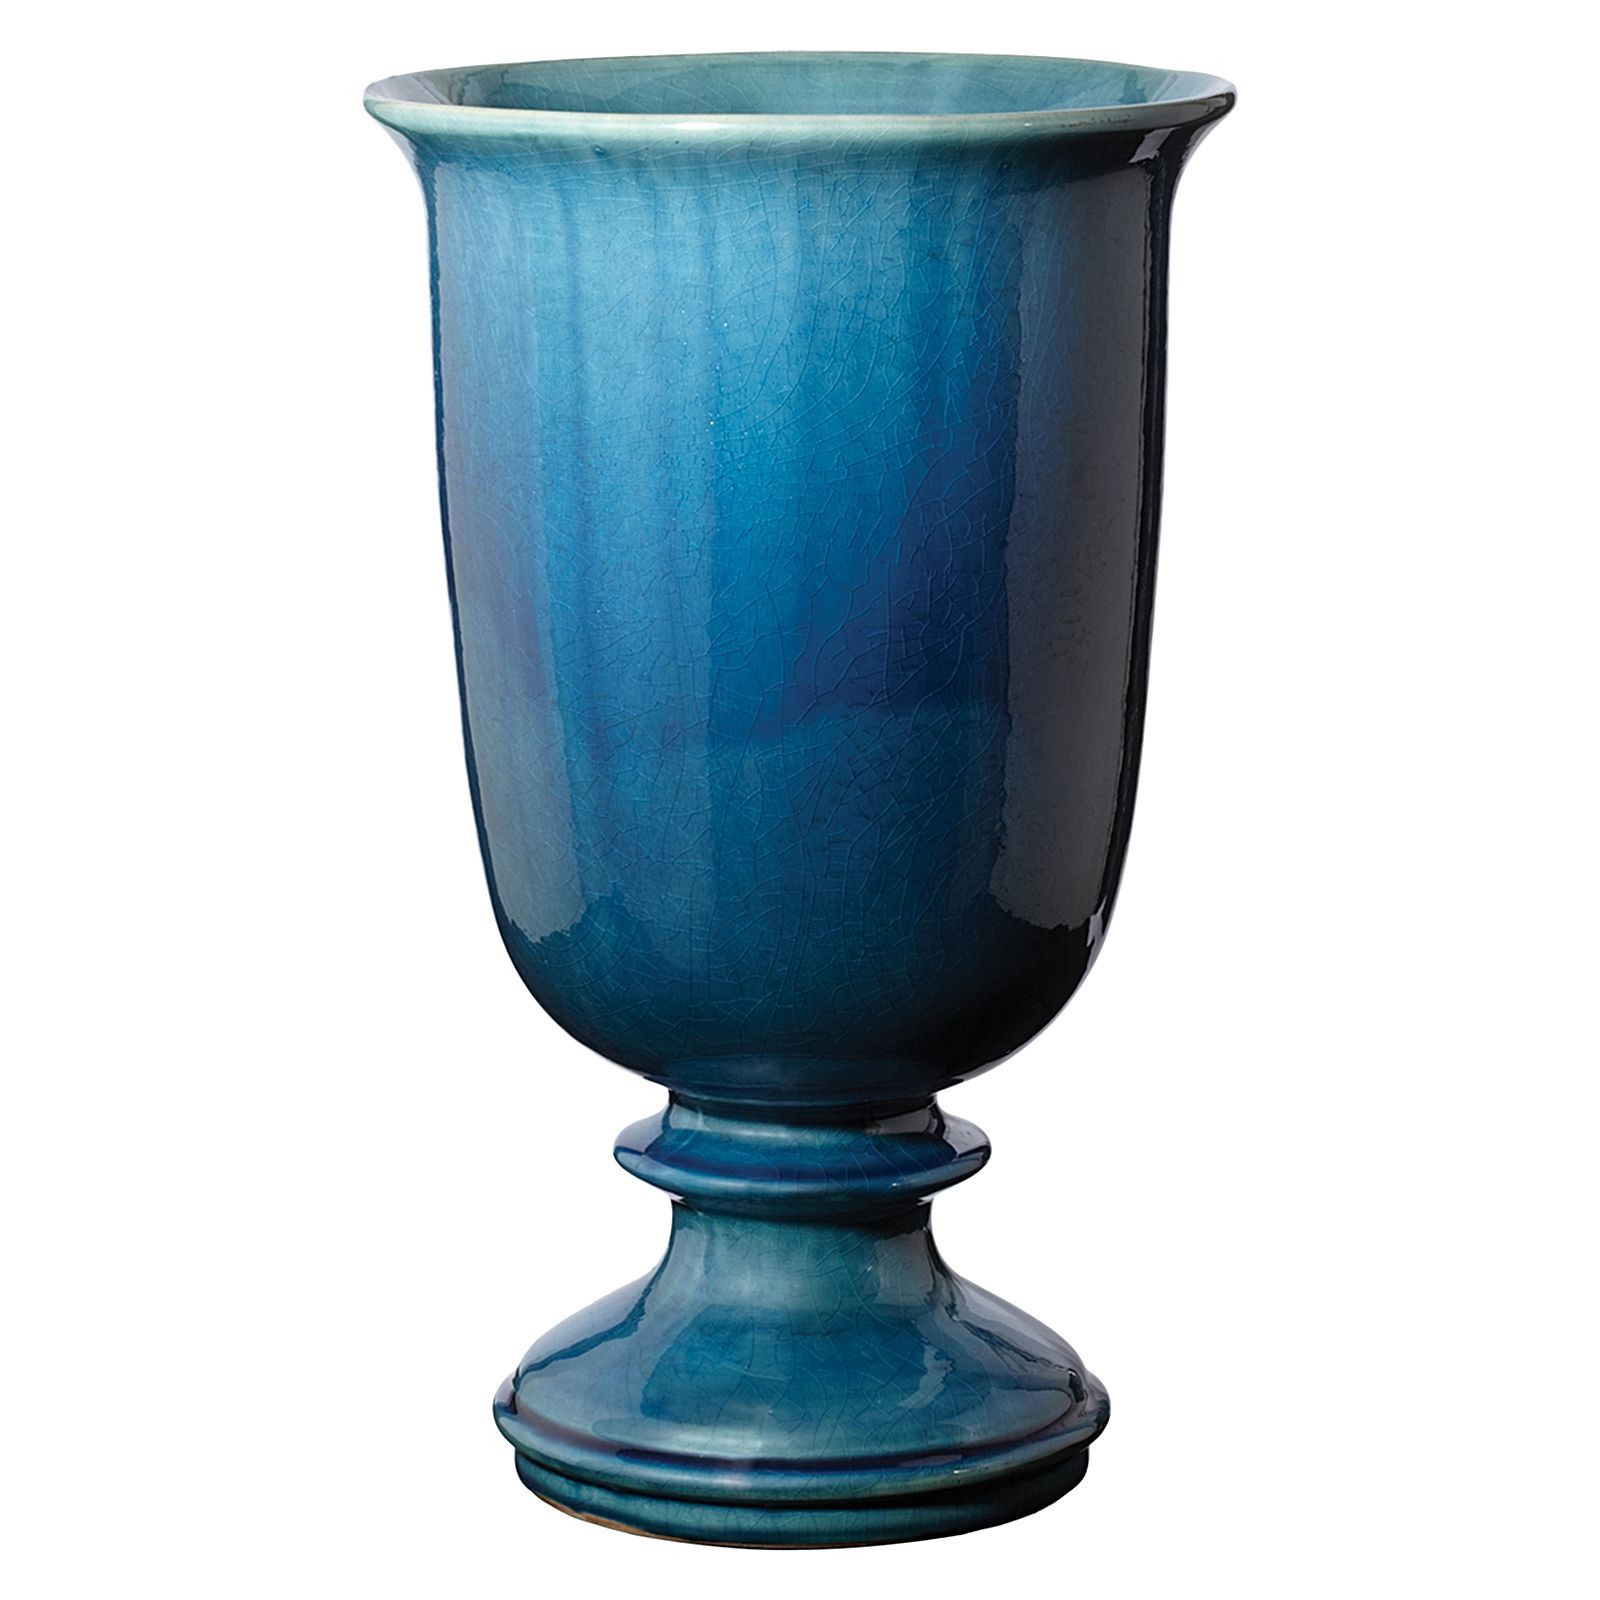 13 Nice Ceramic Urn Vase 2024 free download ceramic urn vase of marine ceramic urn by ls collections zanui wish list pinterest for dimond home marine ceramic urn measures 11 inches long x 11 inches wide x 17 inches high this handcraft